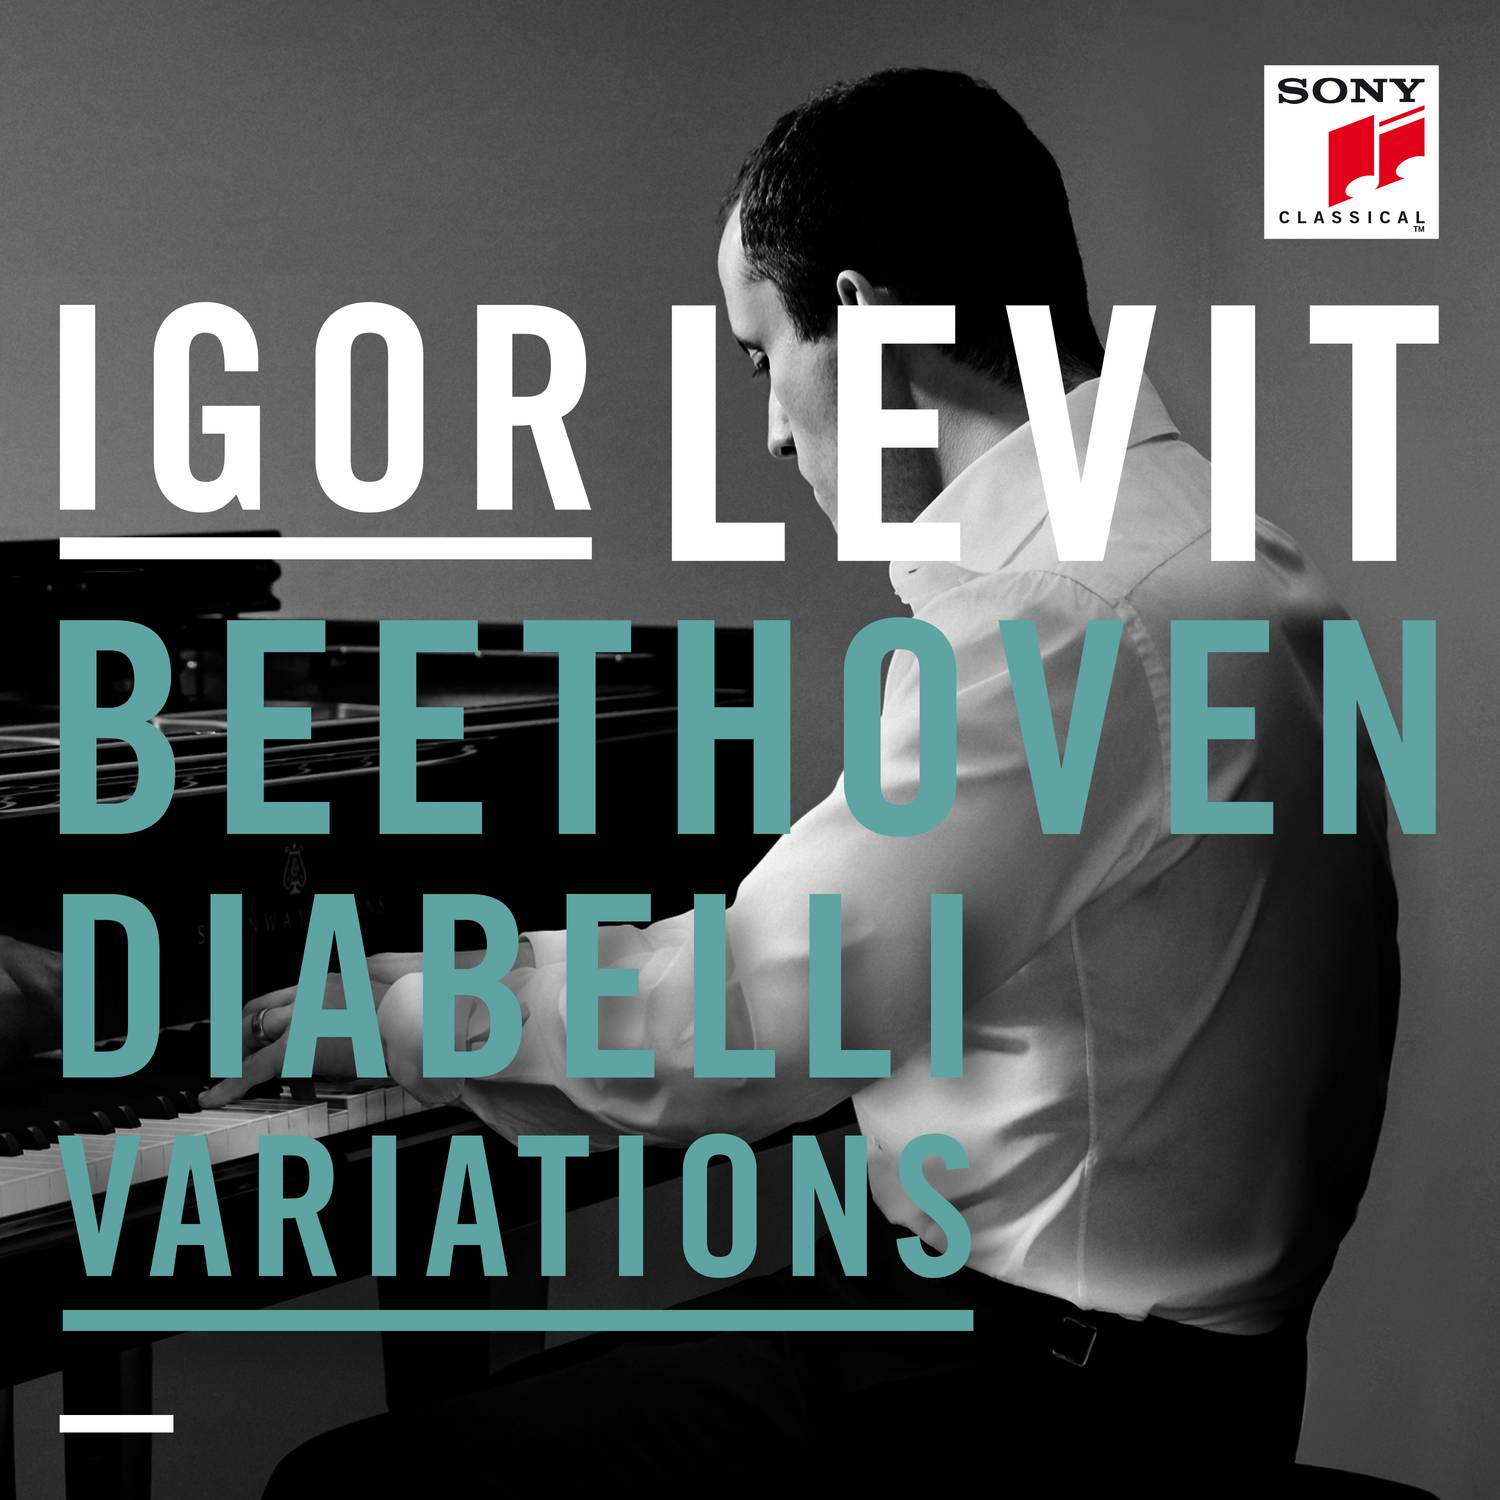 Diabelli Variations - 33 Variations on a Waltz by Anton Diabelli, Op. 120:Var. 3 - L'istesso tempo